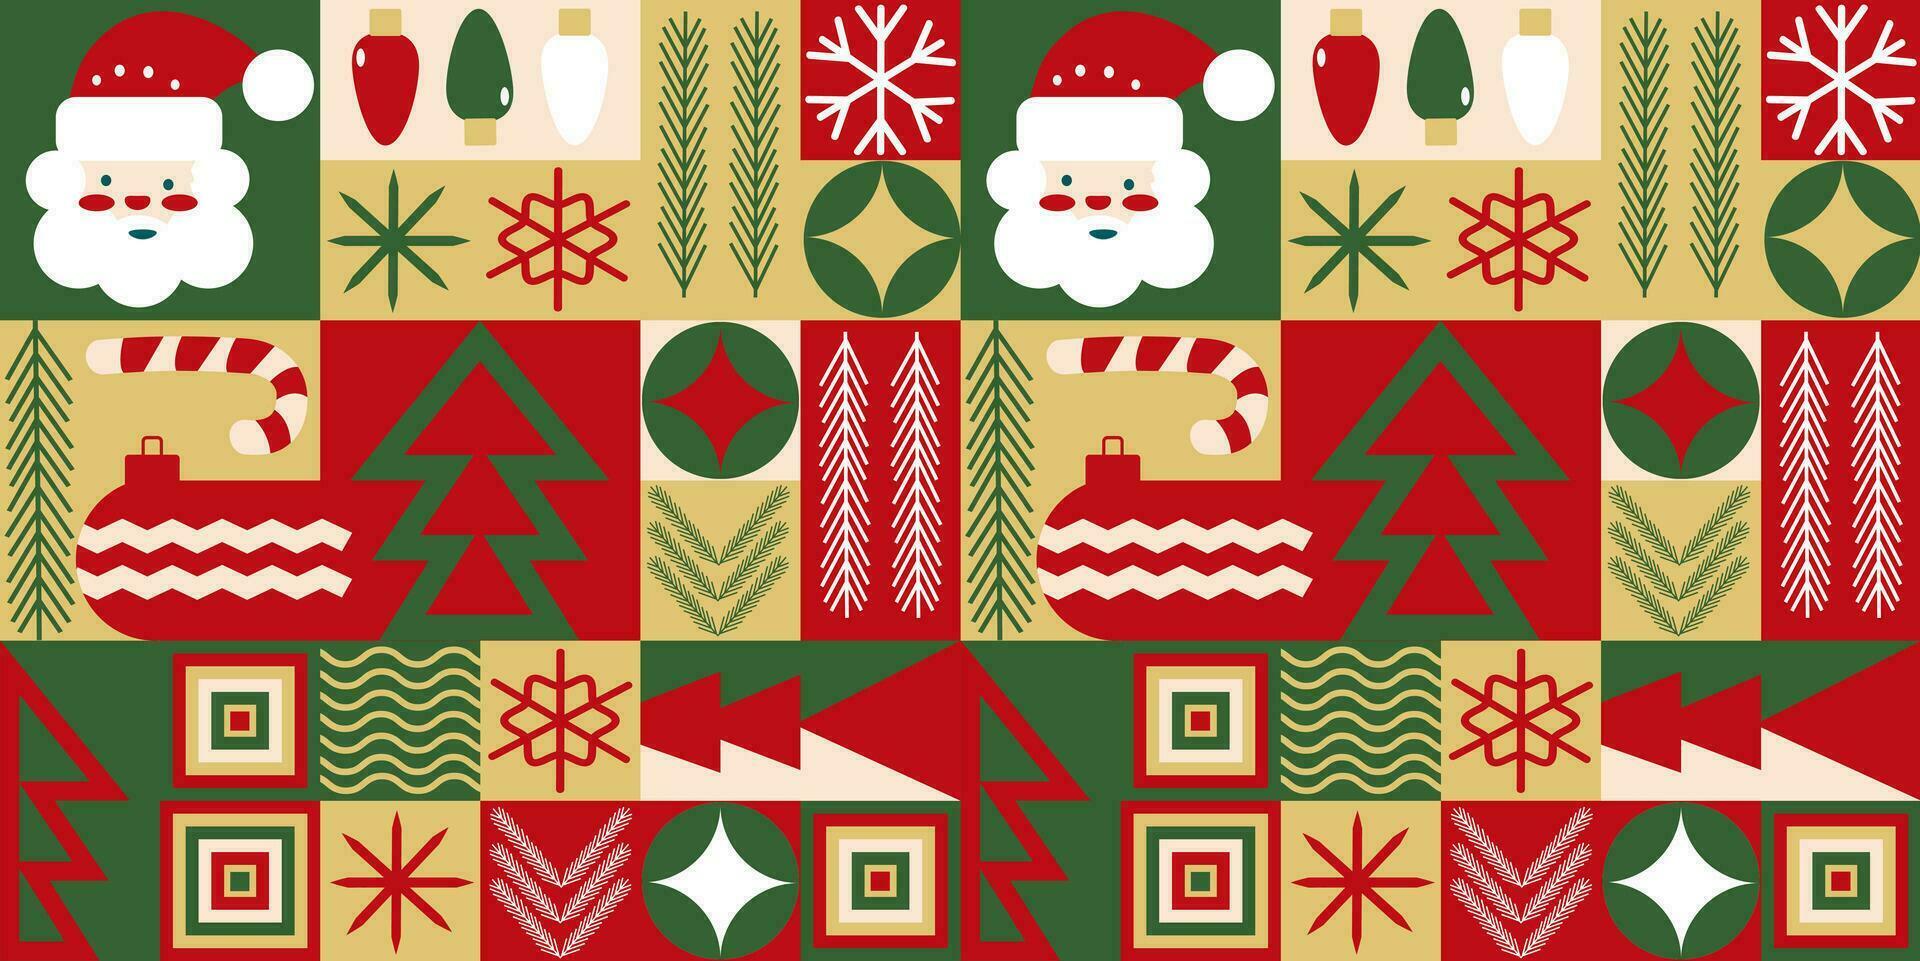 Christmas mosaic icons with geometric seamless pattern for wrapping paper, background, trendy, modern abstract design, style, vector illustration.